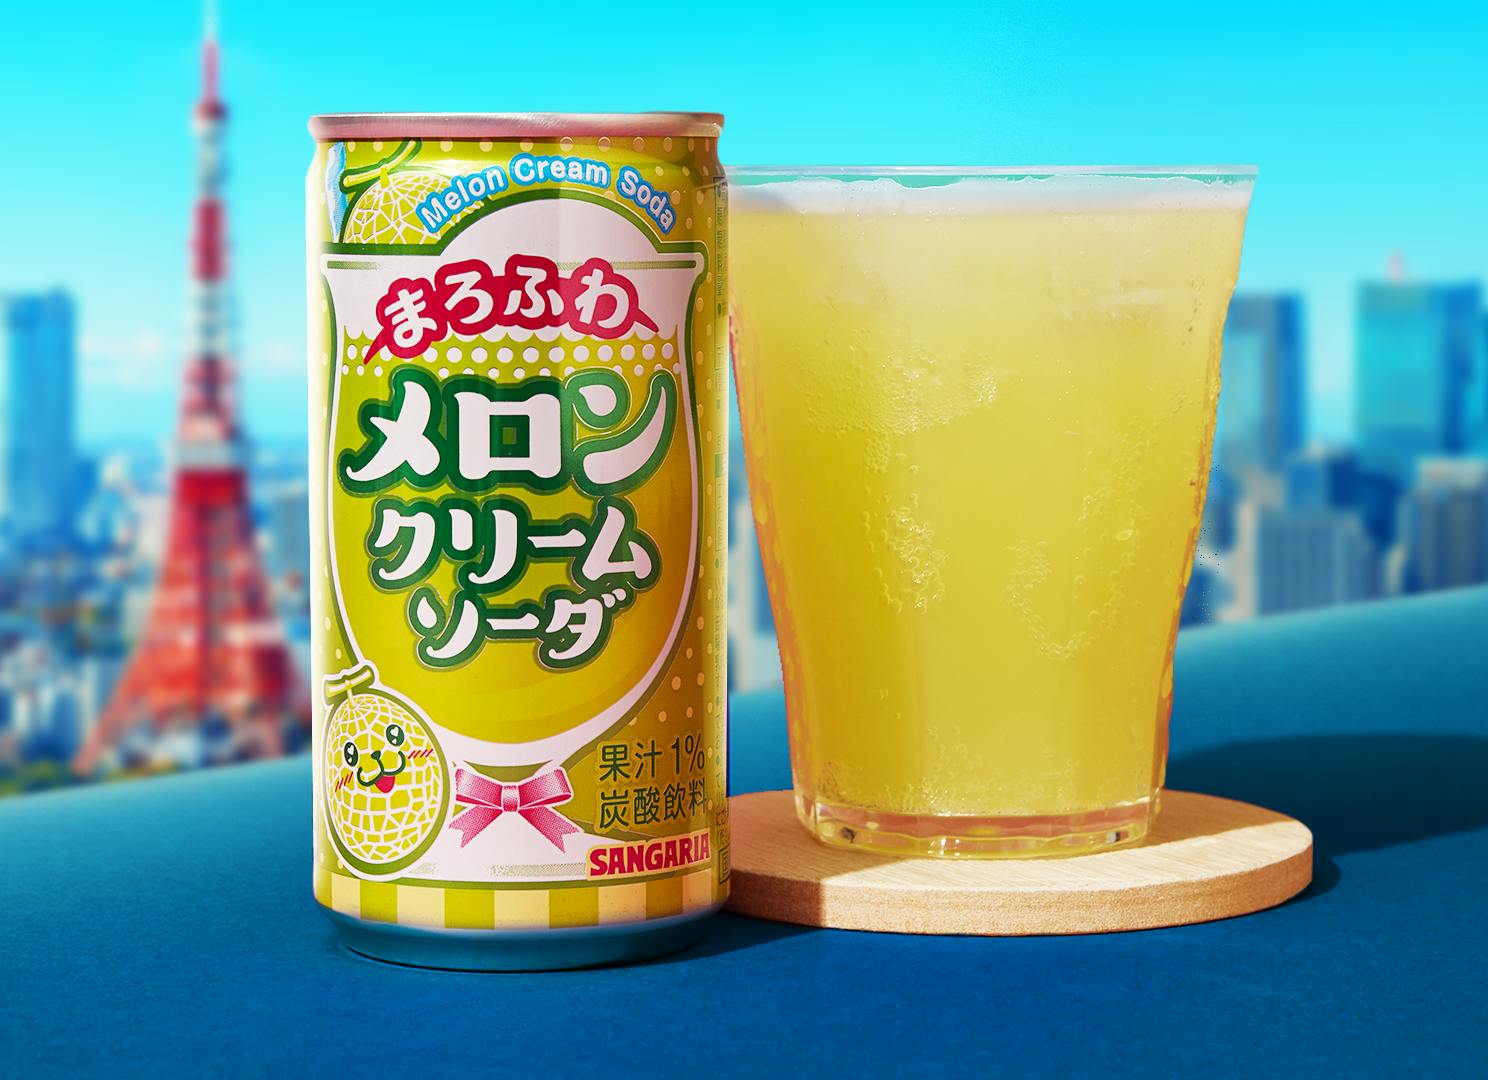 Melon Cream Soda sits against a Tokyo skyline backdrop, with Tokyo Tower visible in the distance.